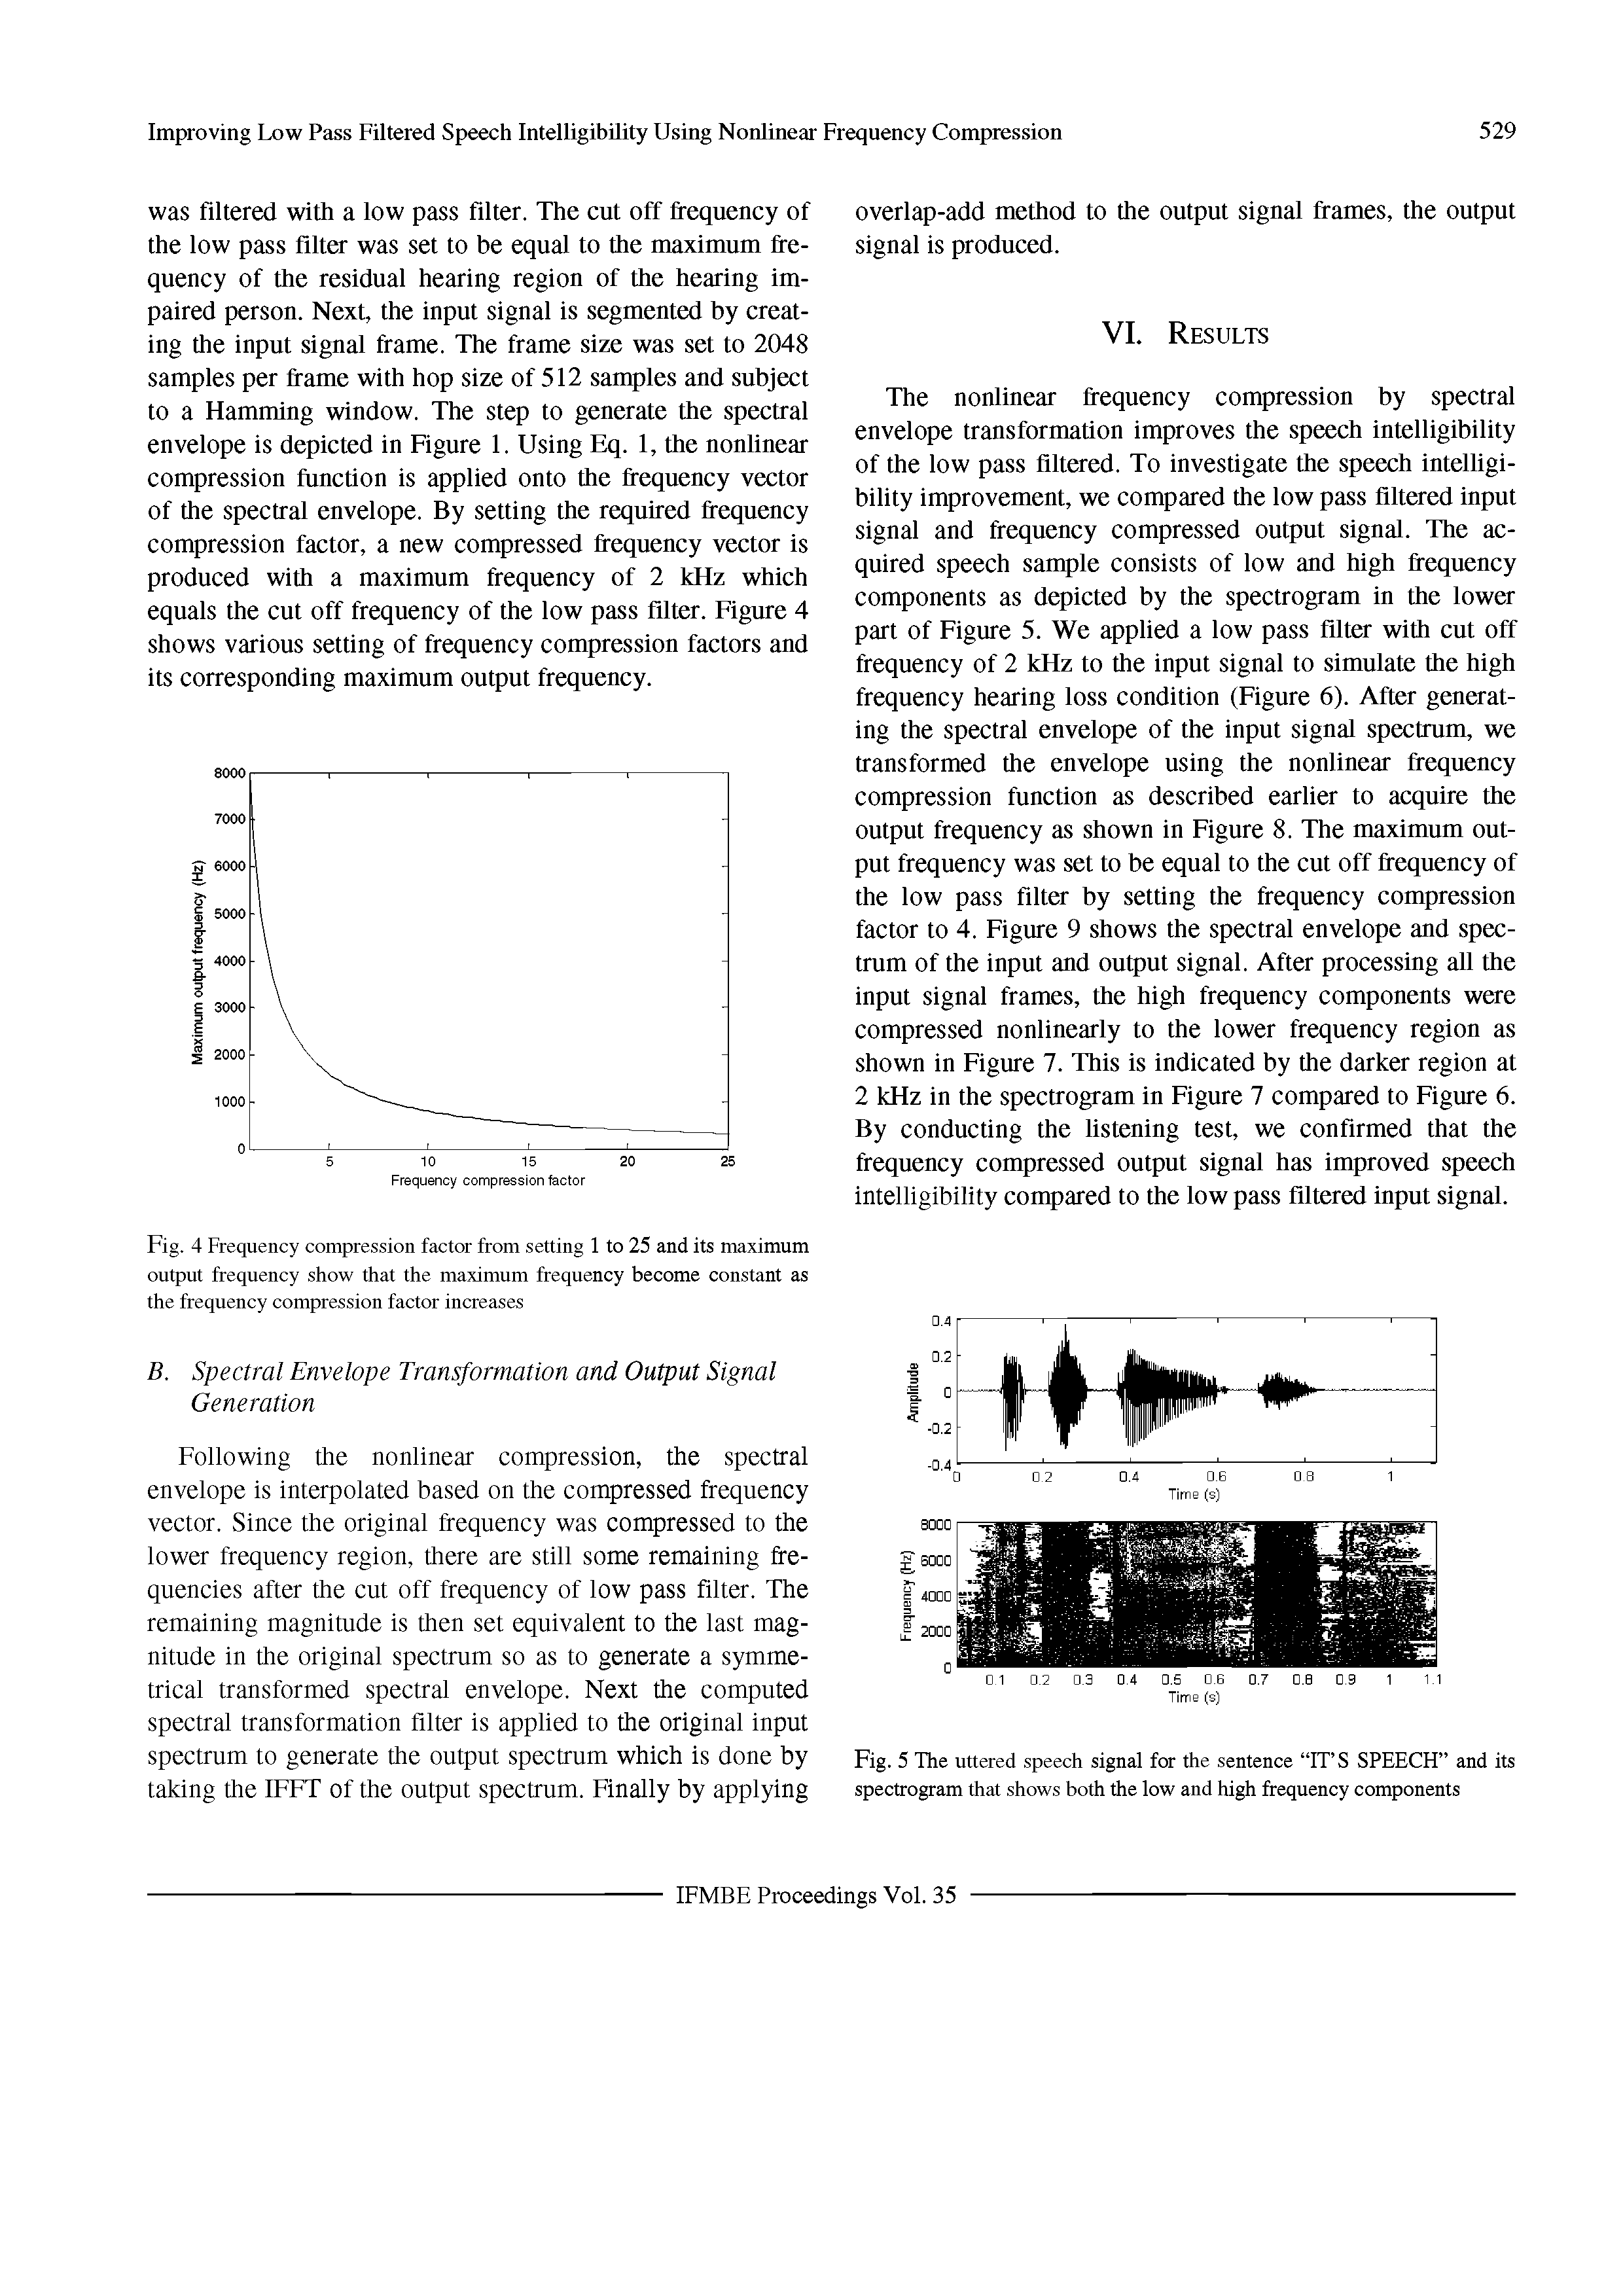 Fig. 4 Frequency compression factor from setting 1 to 25 and its maximum output frequency show that the maximum frequency become constant as the frequency compression factor increases...